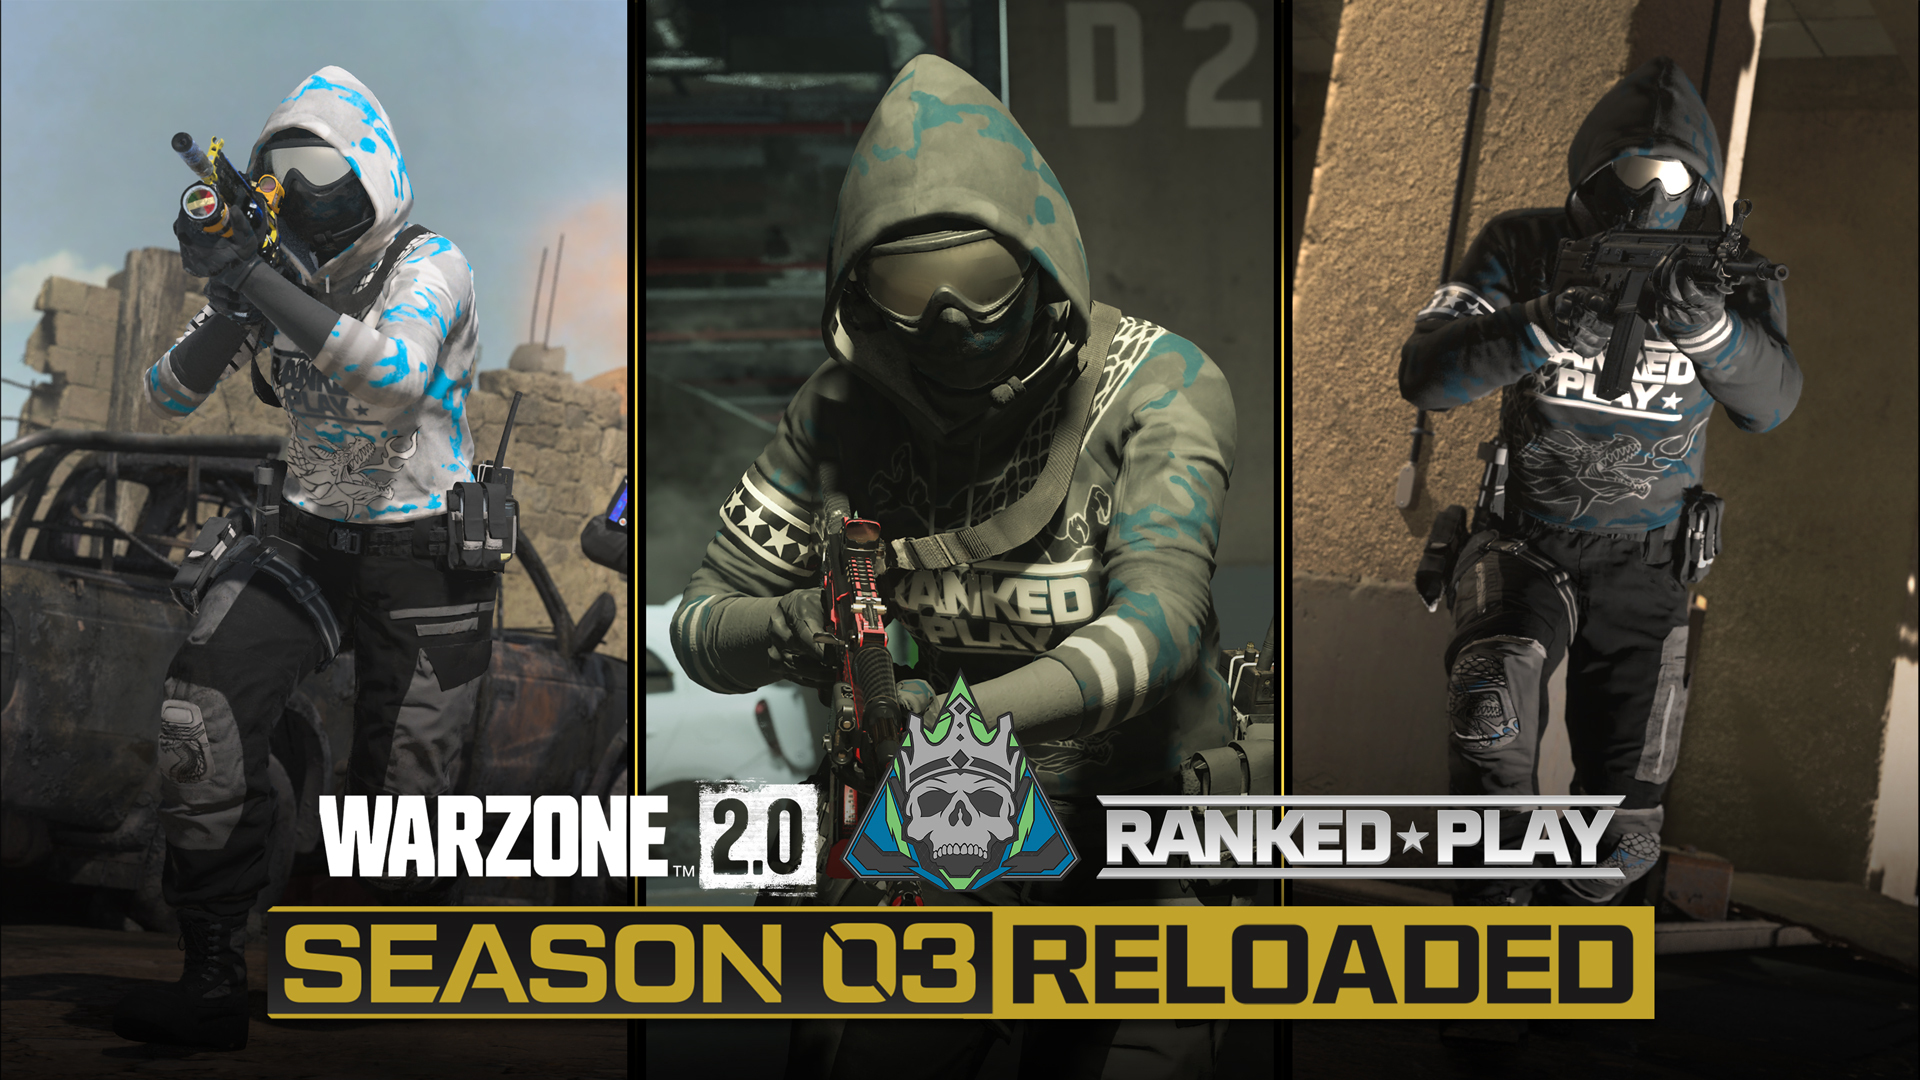 Warzone Mobile Season 3 Reloaded brings a number of new features and content in the game, CHECK DETAILS